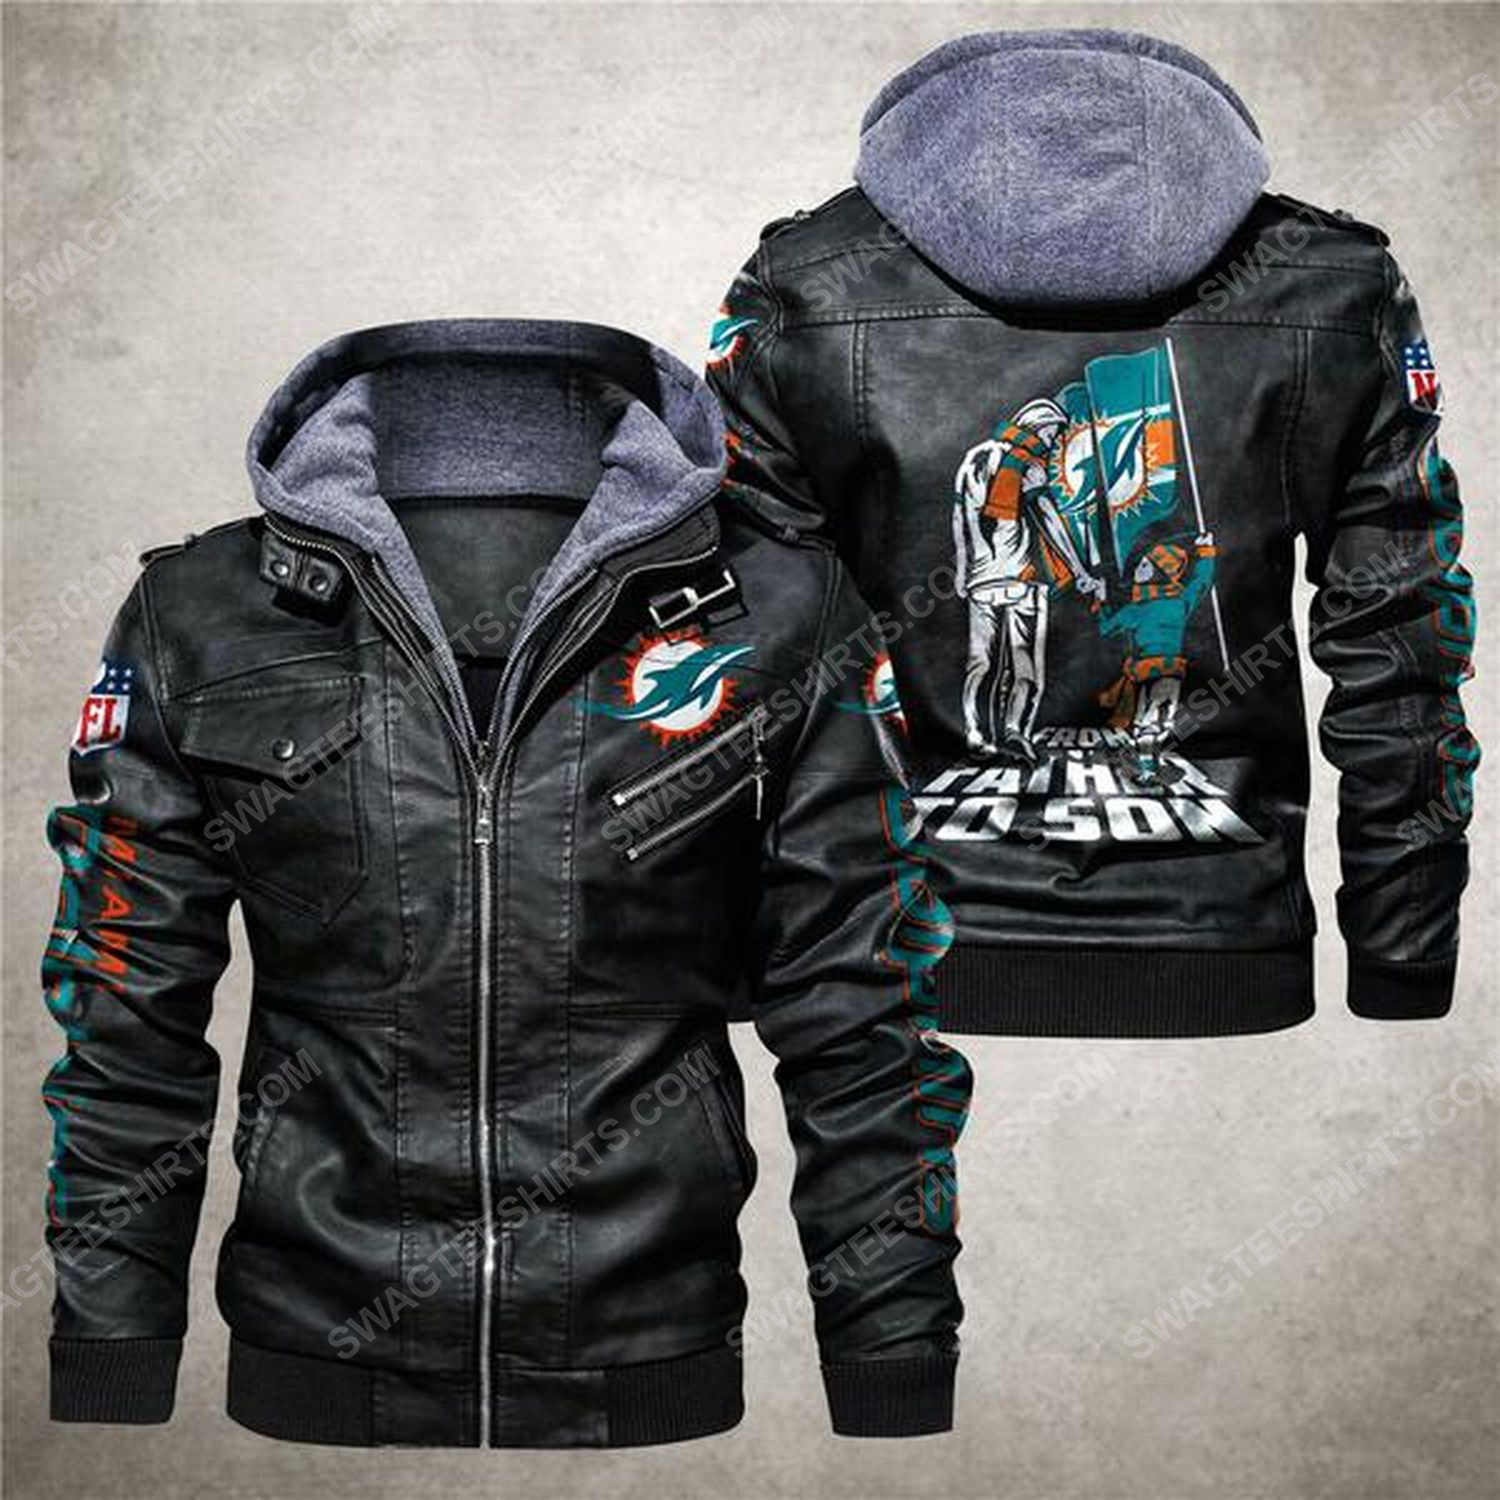 [special edition] National football league miami dolphins from father to son leather jacket – Maria